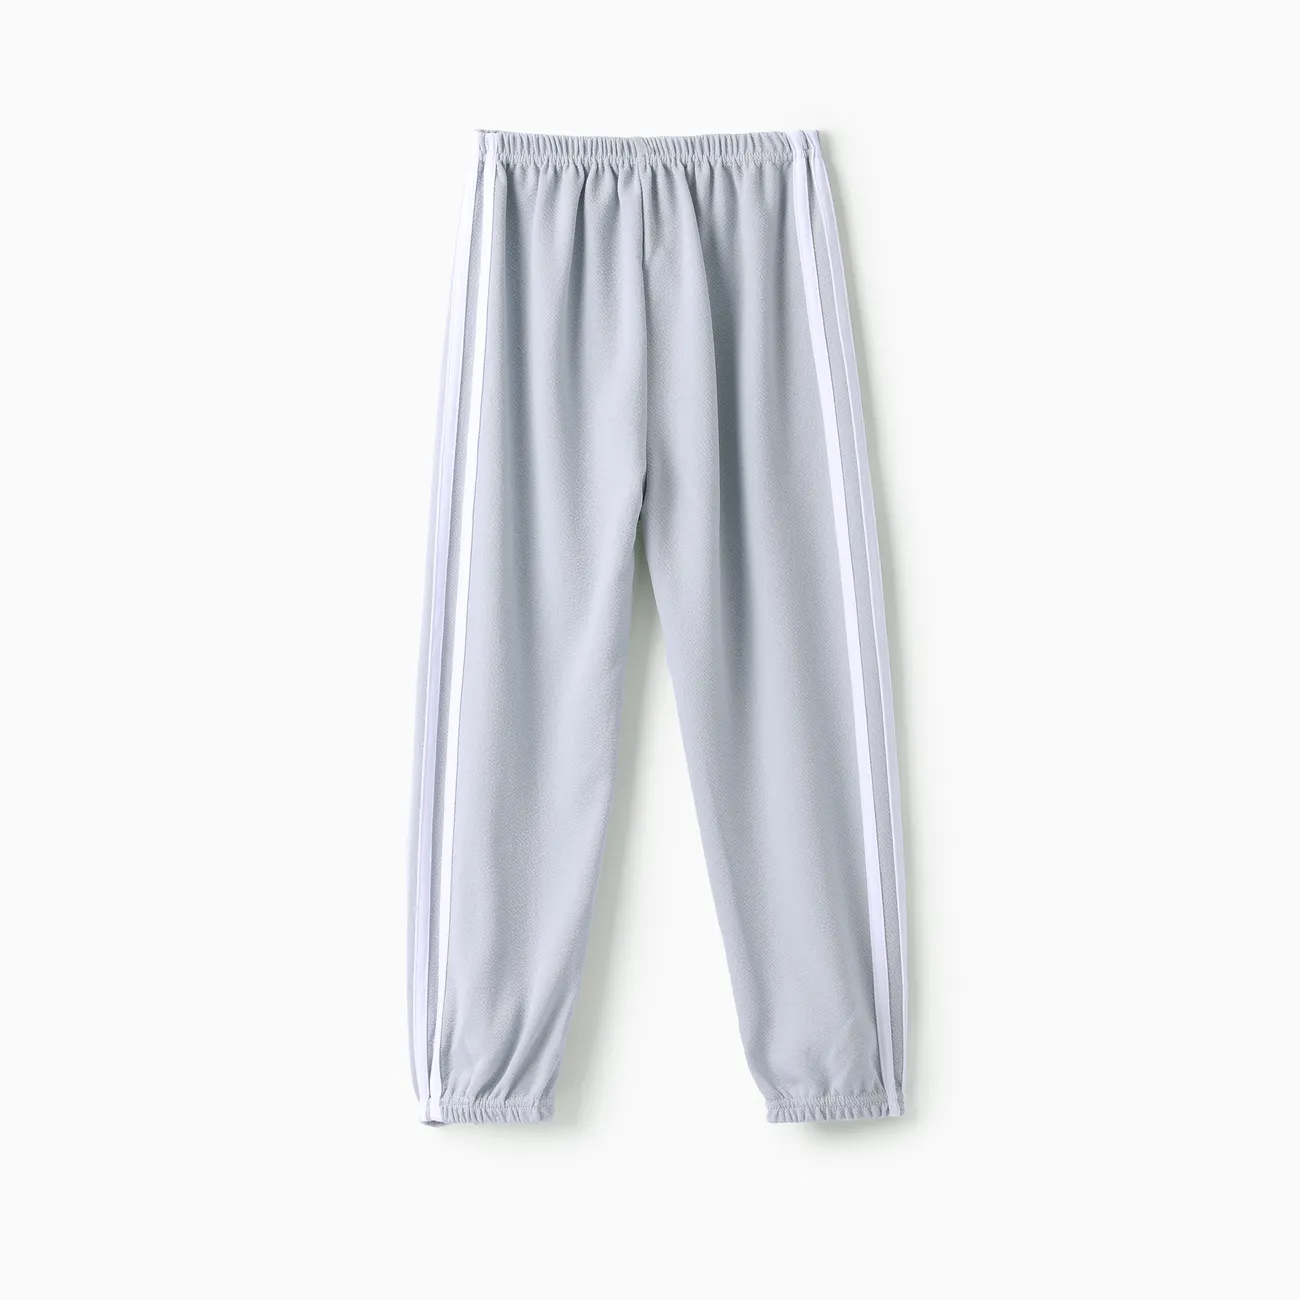 Kid Boy/Kid Girl Sporty Striped Breathable Ankle Length Thin Pants for Summer/Fall Grey big image 1